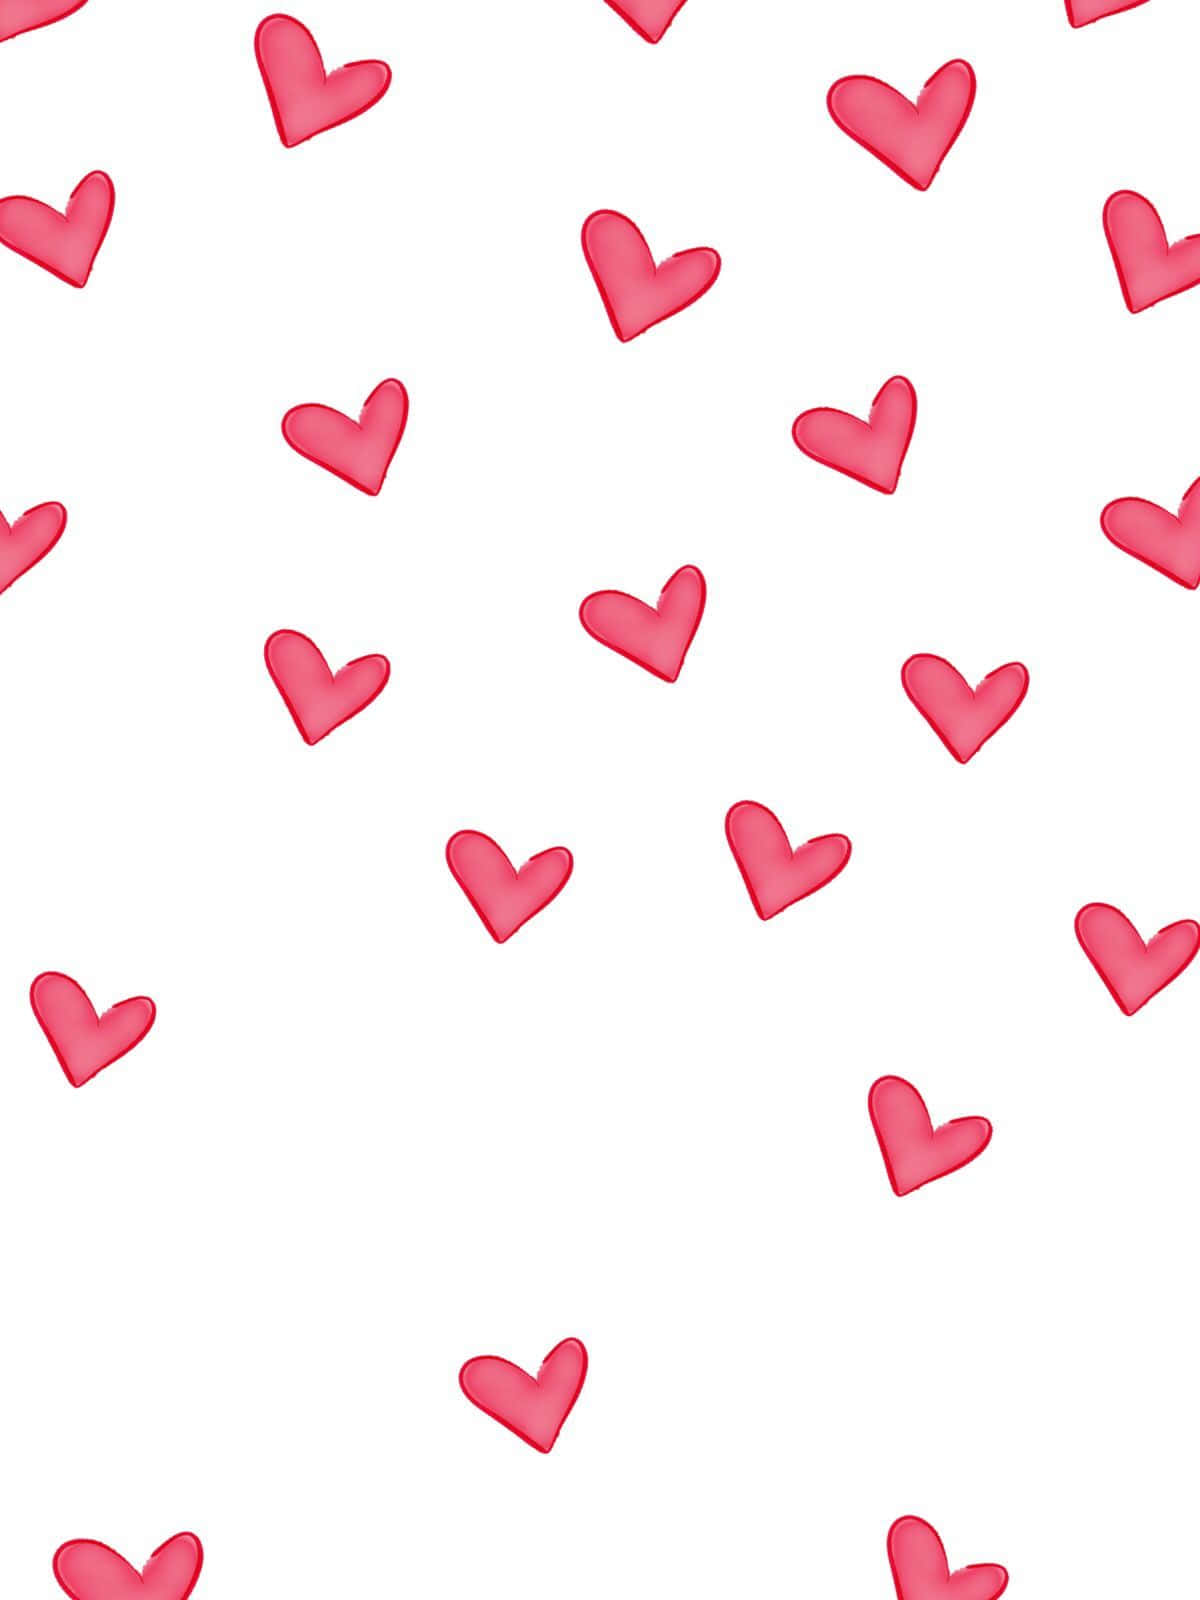 A Pink Heart Pattern On A White Background